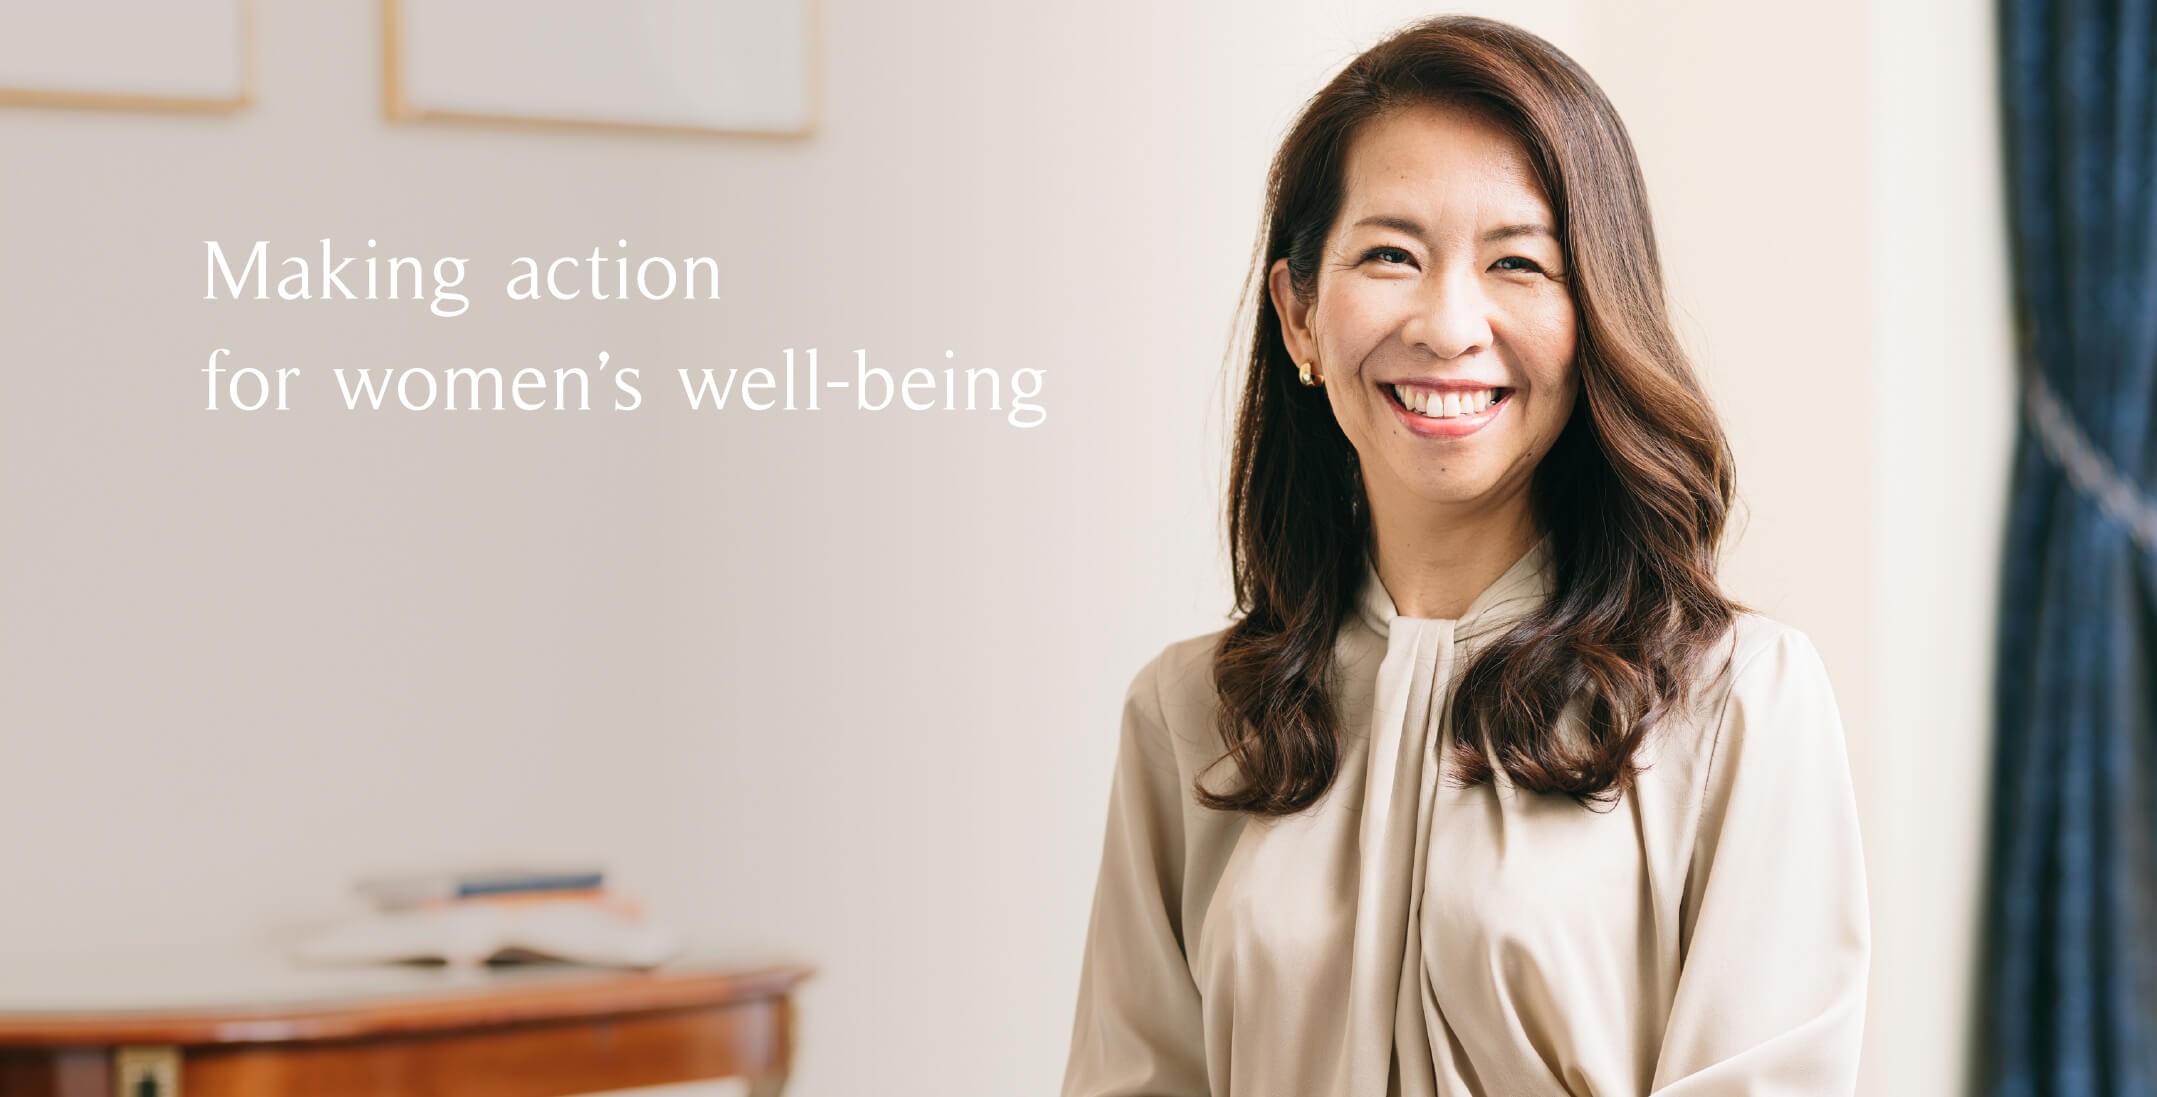 Making action for women’s well-being